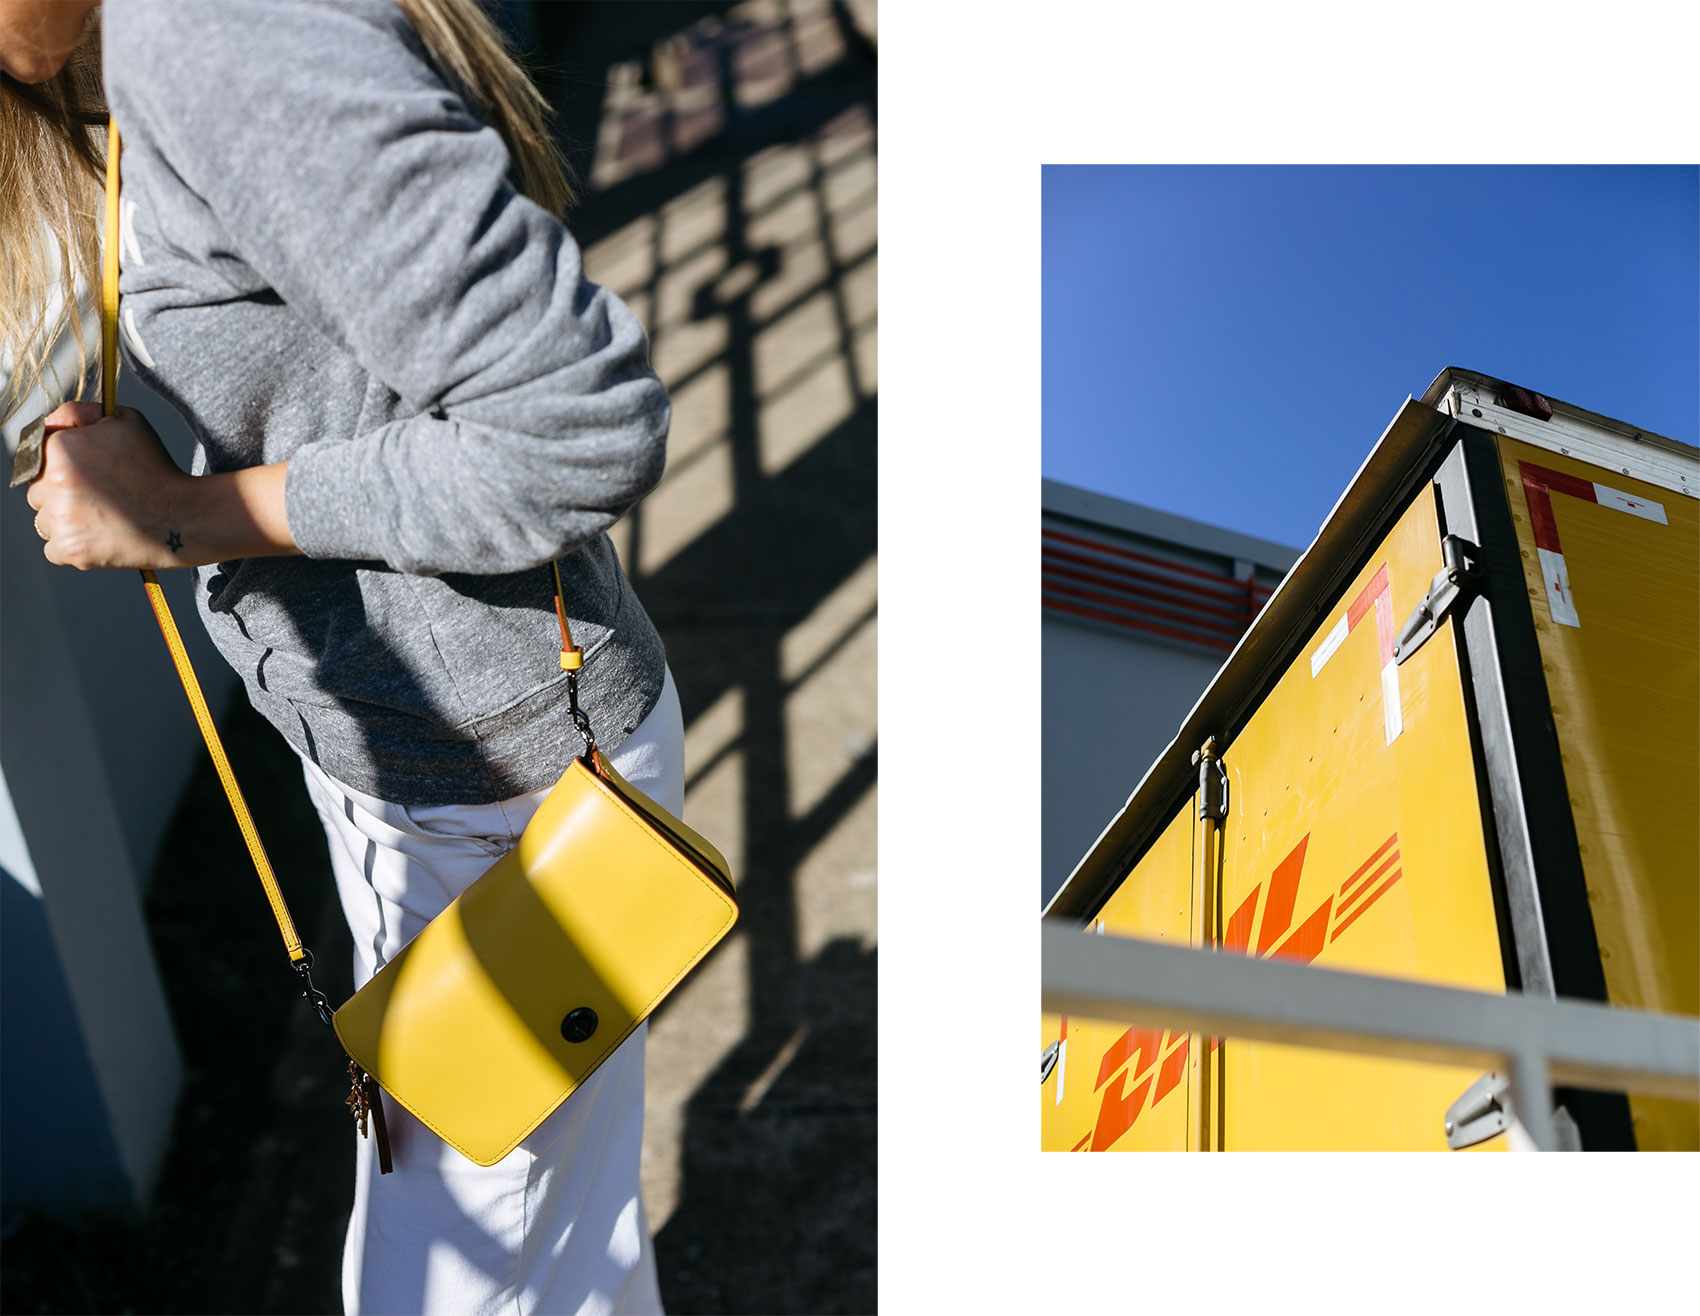 Maristella wearing a grey sweatshirt with white jeans and yellow shoulder bag